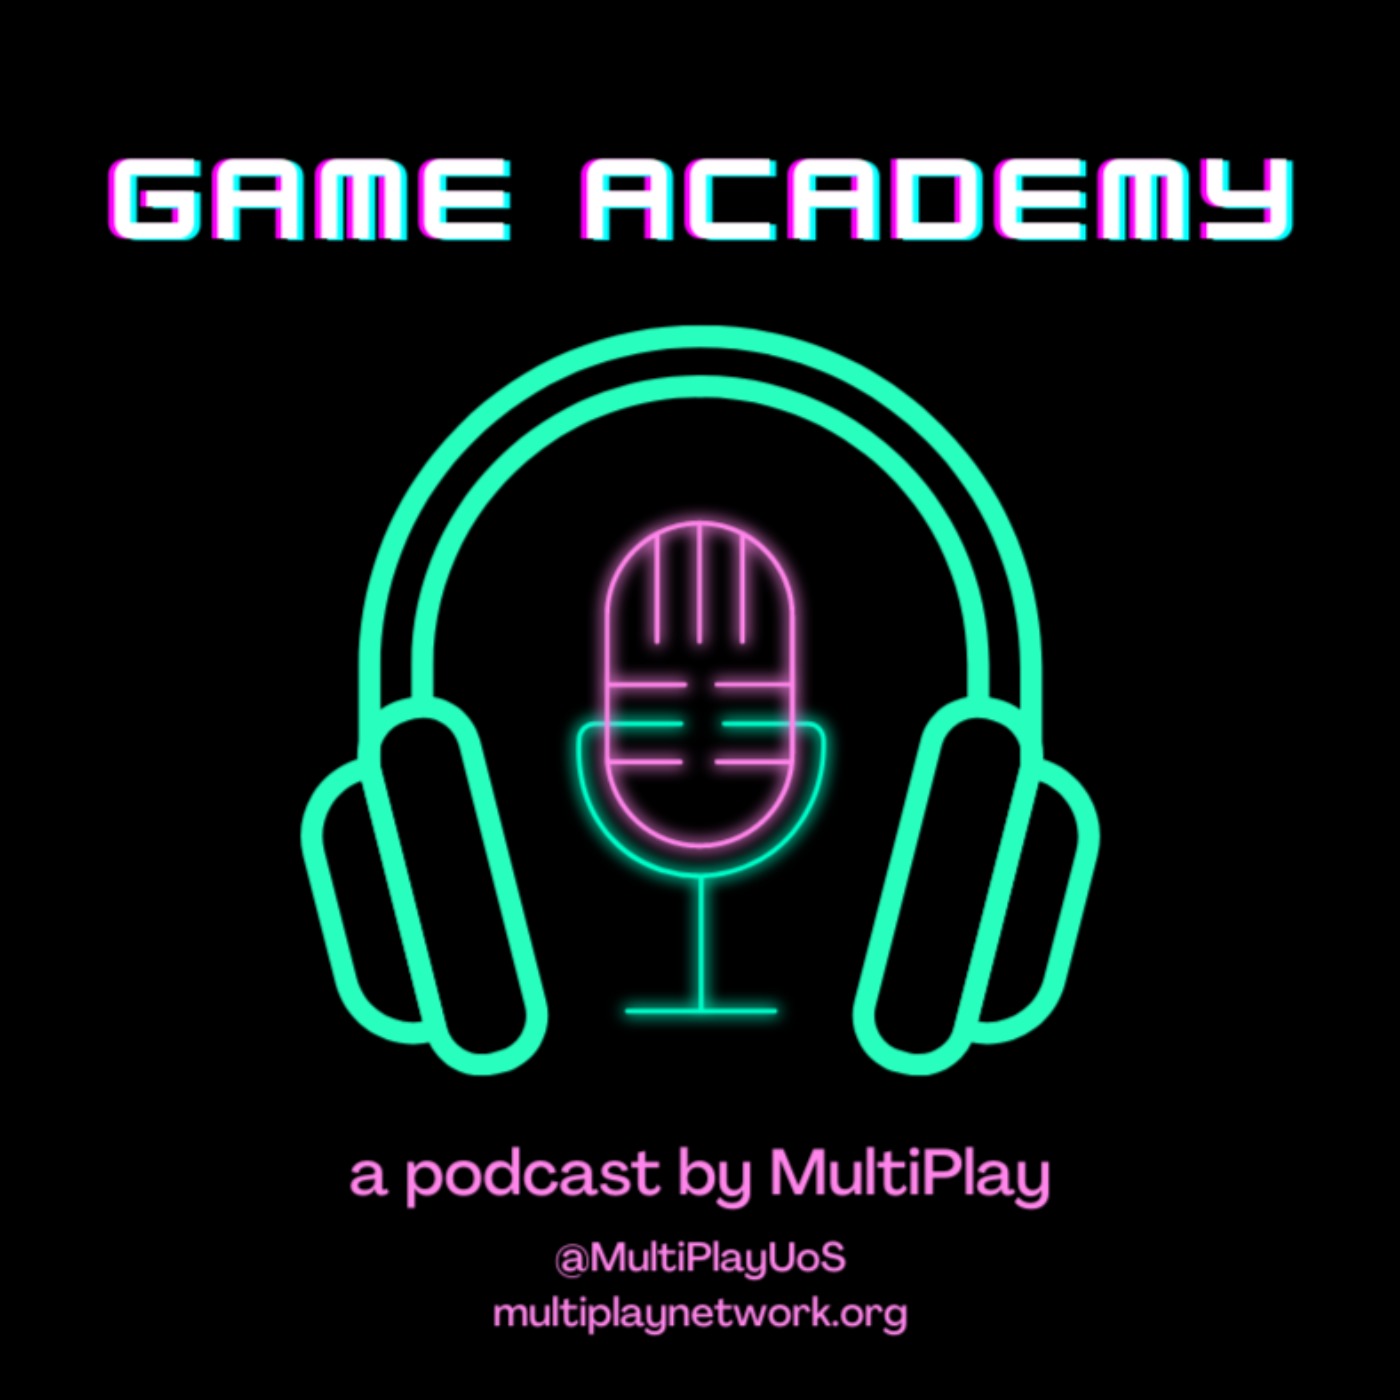 Episode 1: Sex and Romance in Video Games (with Imo Kaufman) | Game Academy  on Acast